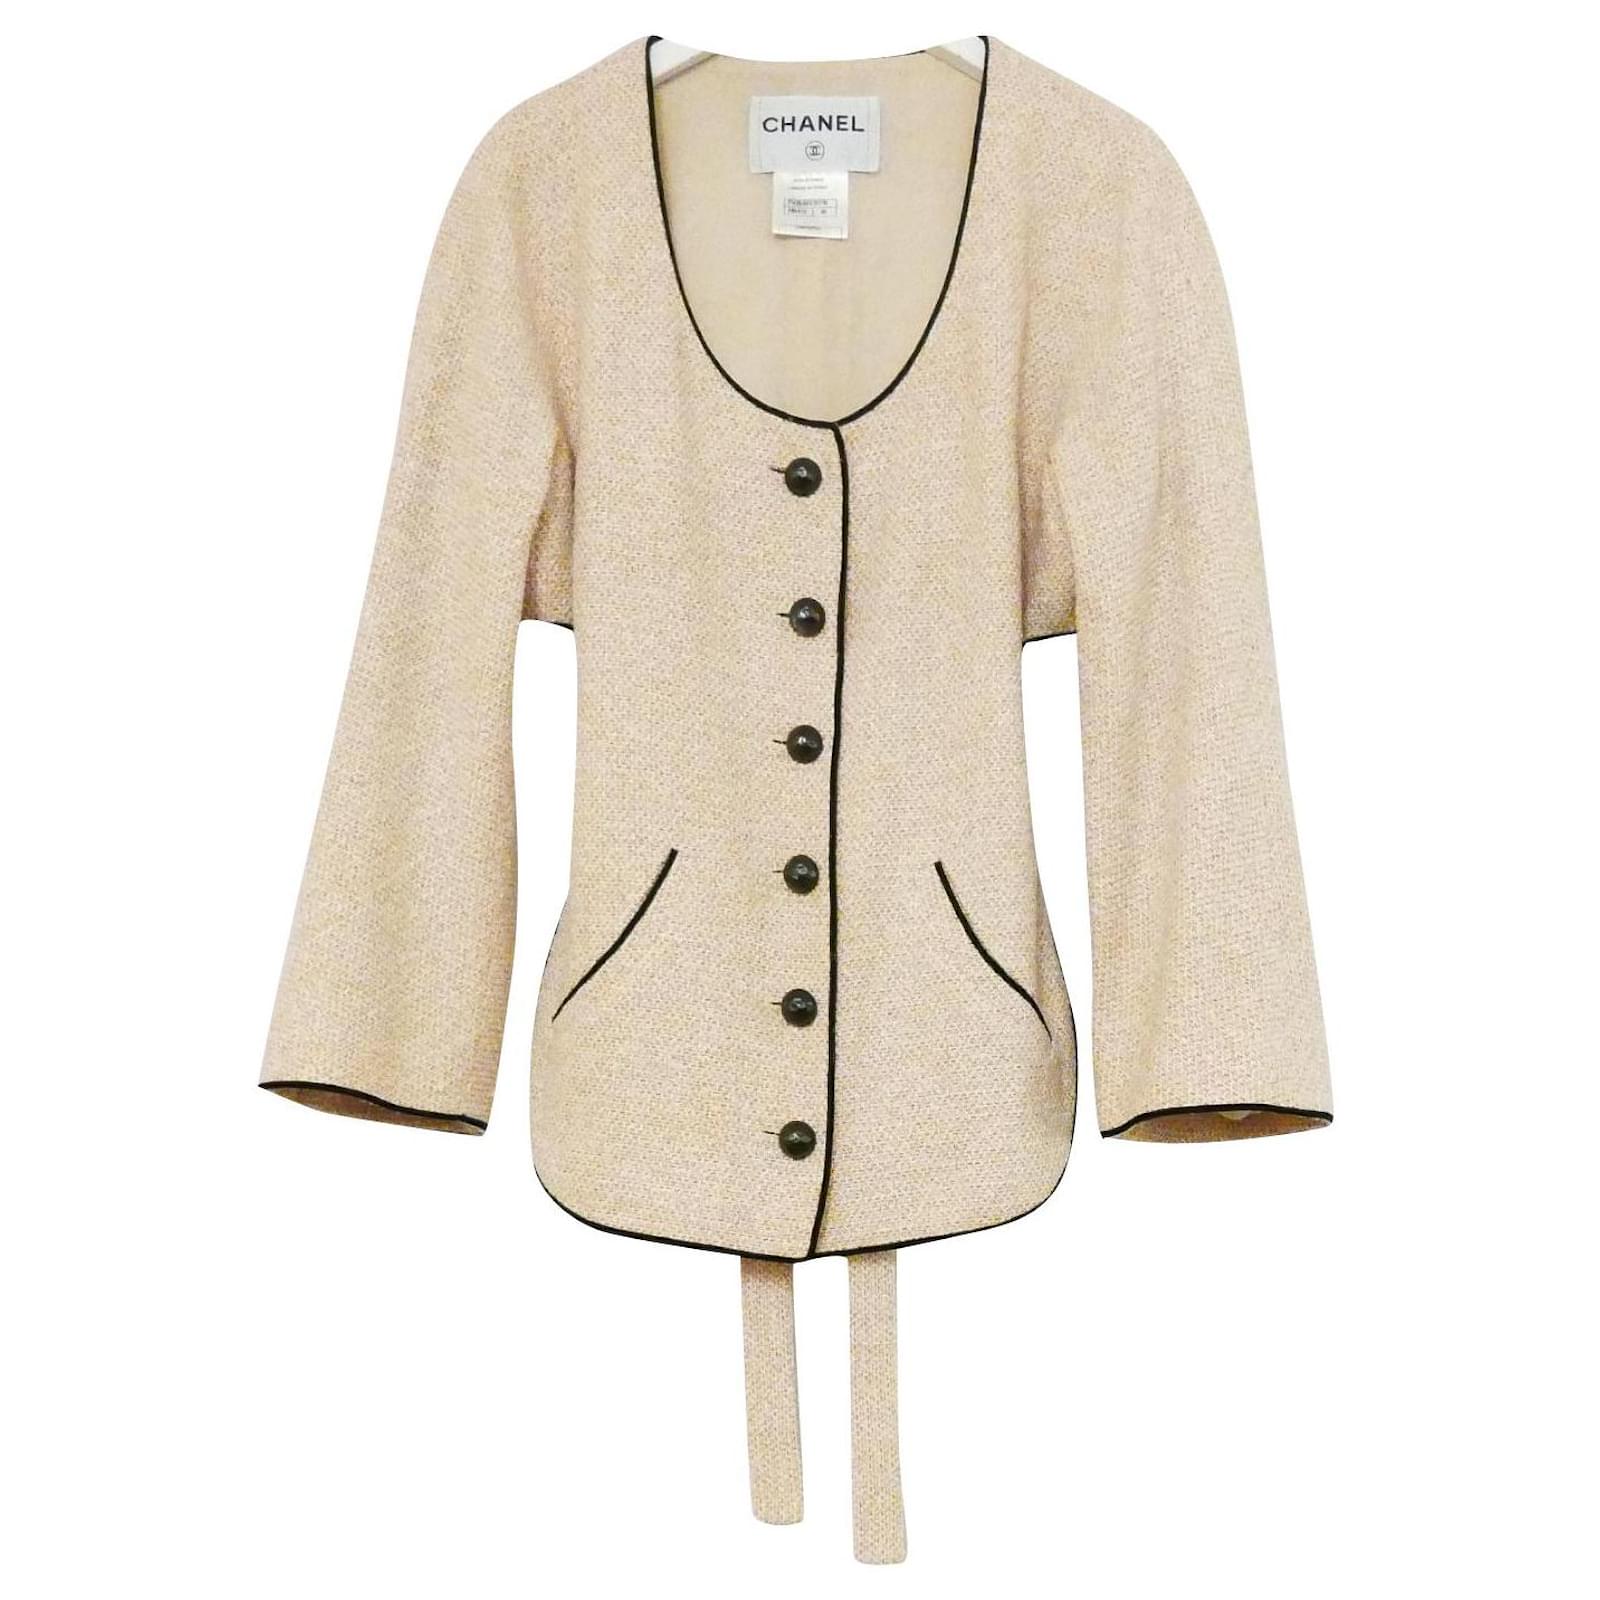 Celine and Chanel Inspired Cardigan Jackets  ANNIE B